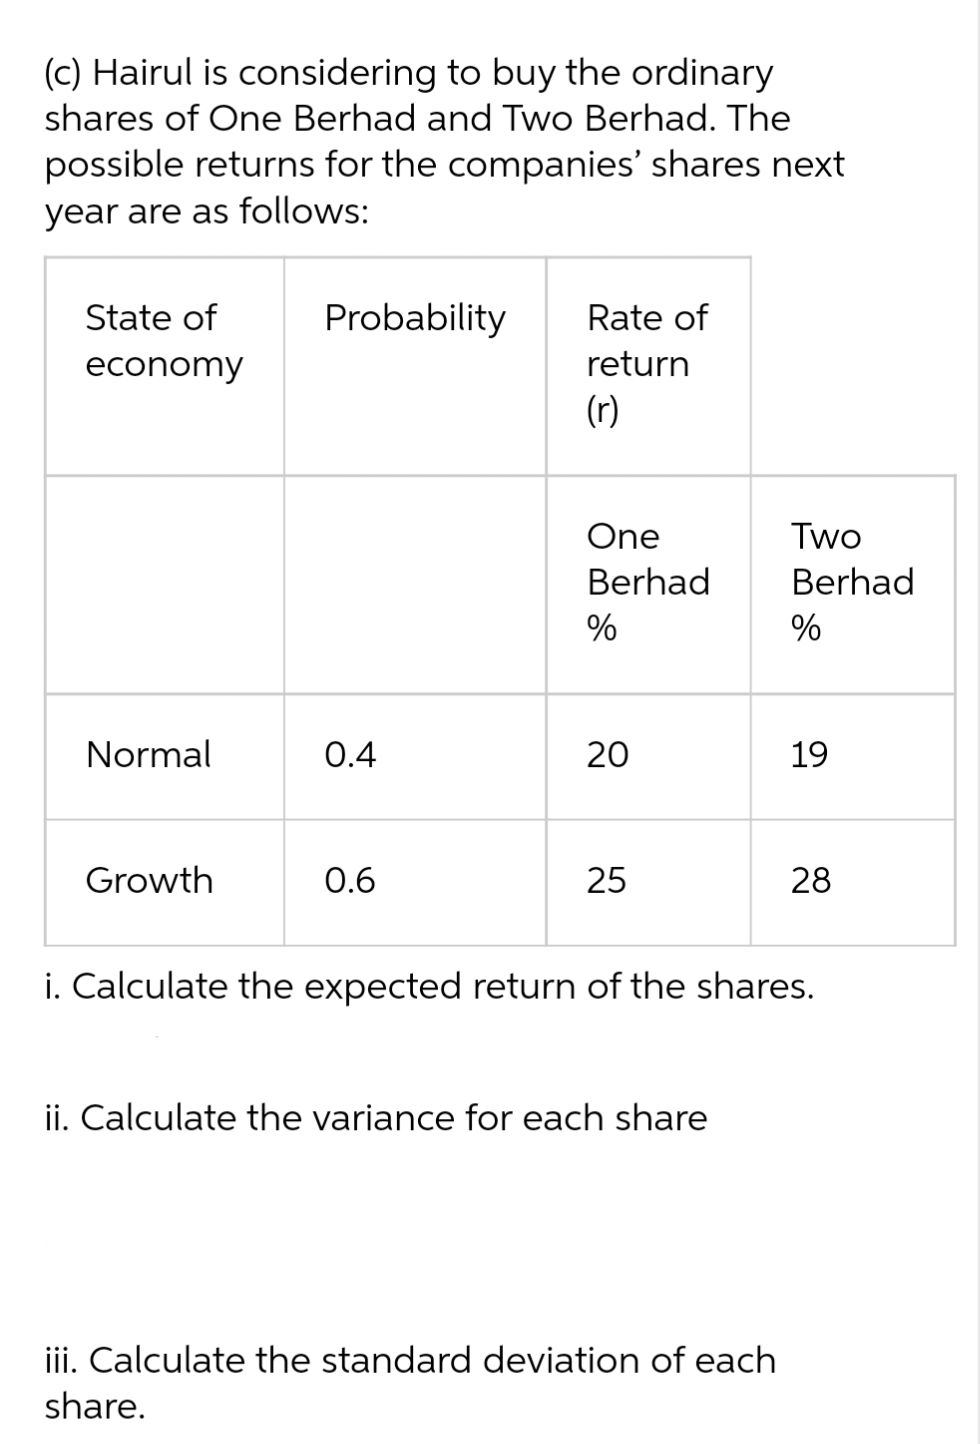 (c) Hairul is considering to buy the ordinary
shares of One Berhad and Two Berhad. The
possible returns for the companies' shares next
year are as follows:
State of
economy
Normal
Growth
Probability
0.4
0.6
Rate of
return
(r)
One
Berhad
%
20
25
ii. Calculate the variance for each share
Two
Berhad
%
iii. Calculate the standard deviation of each
share.
19
i. Calculate the expected return of the shares.
28